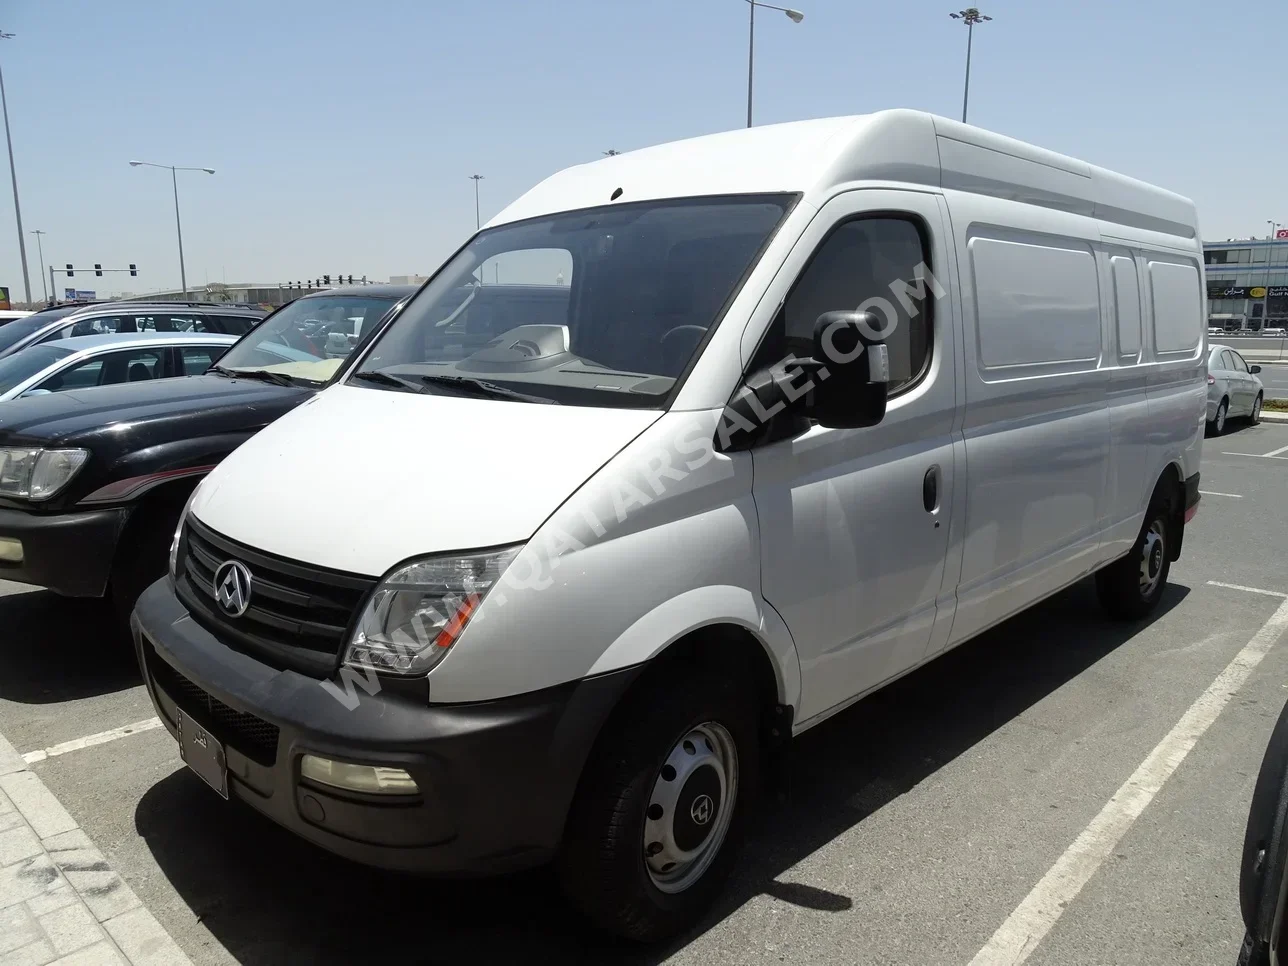 Maxus  V80  2016  Manual  80,000 Km  4 Cylinder  Front Wheel Drive (FWD)  Van / Bus  White